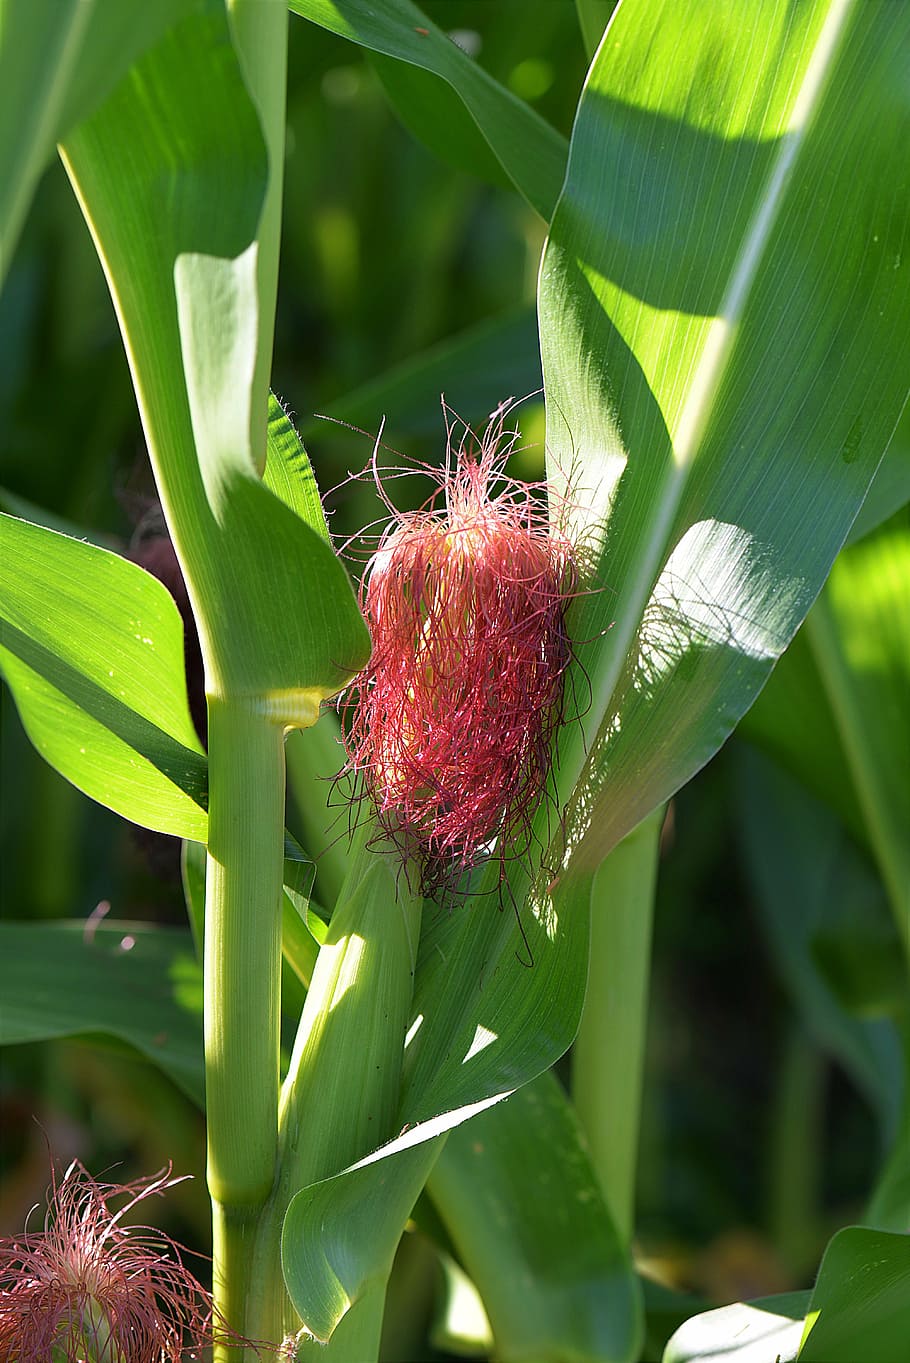 corn, stylus, piston, green, green color, leaf, red, plant, nature, flower